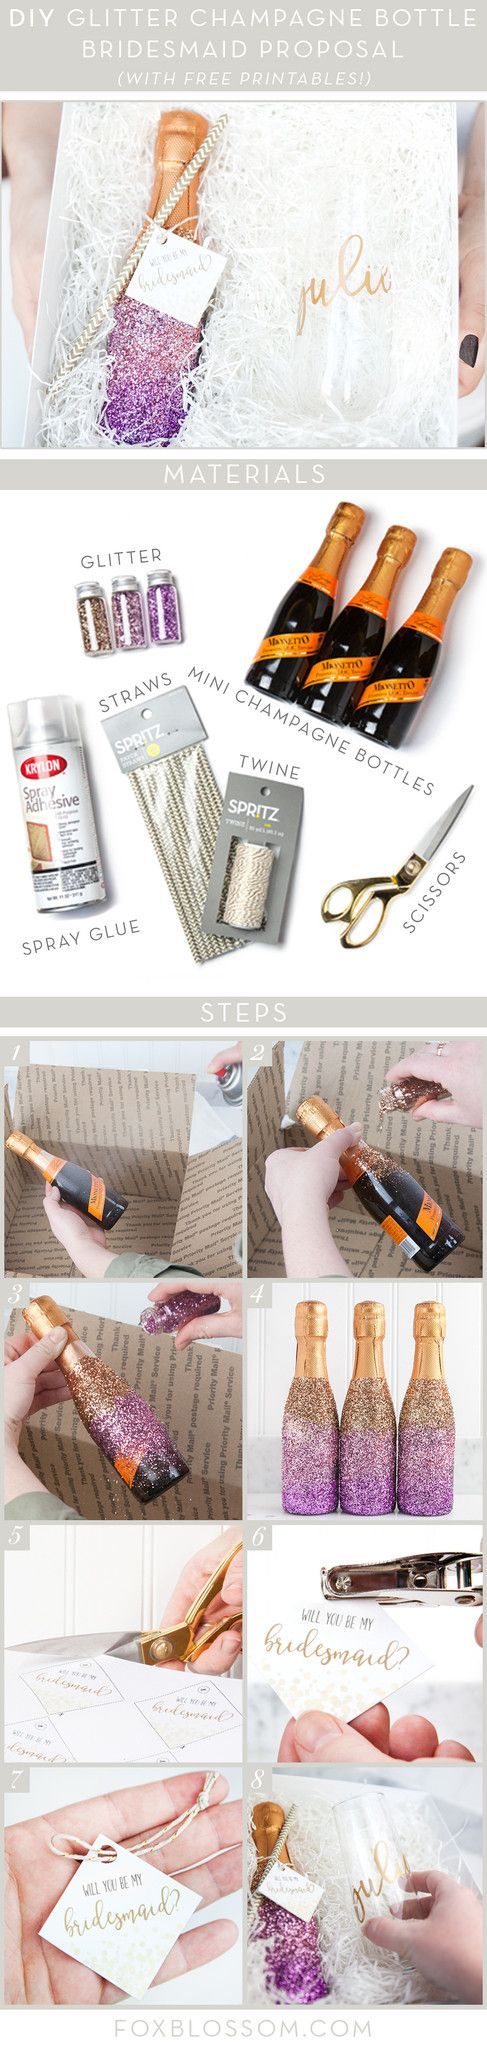 Alright ladies, it's time to get crafty! These DIY glitter champagne bottles...